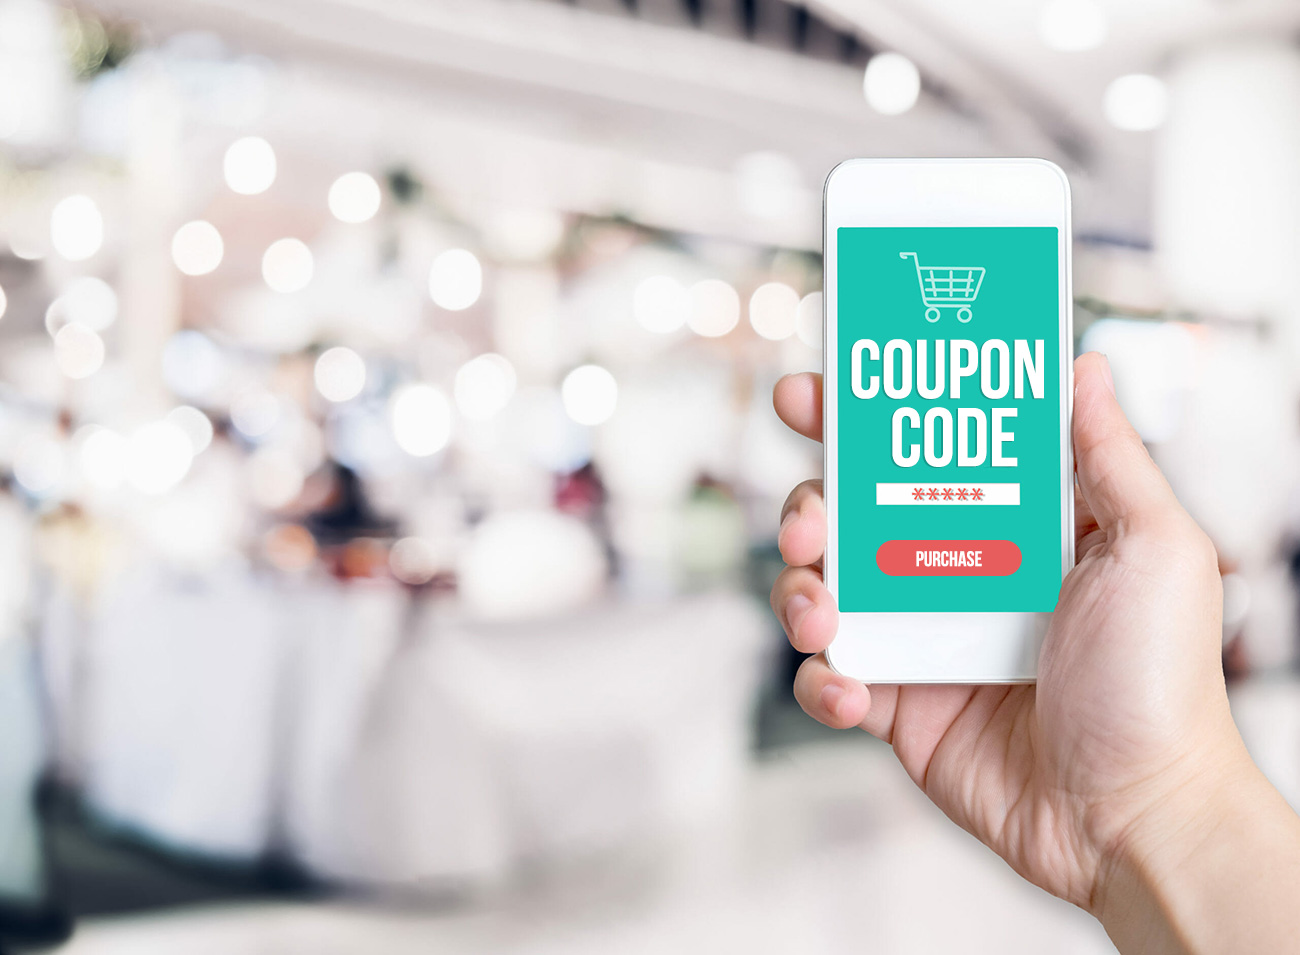 Coupon / discount systems